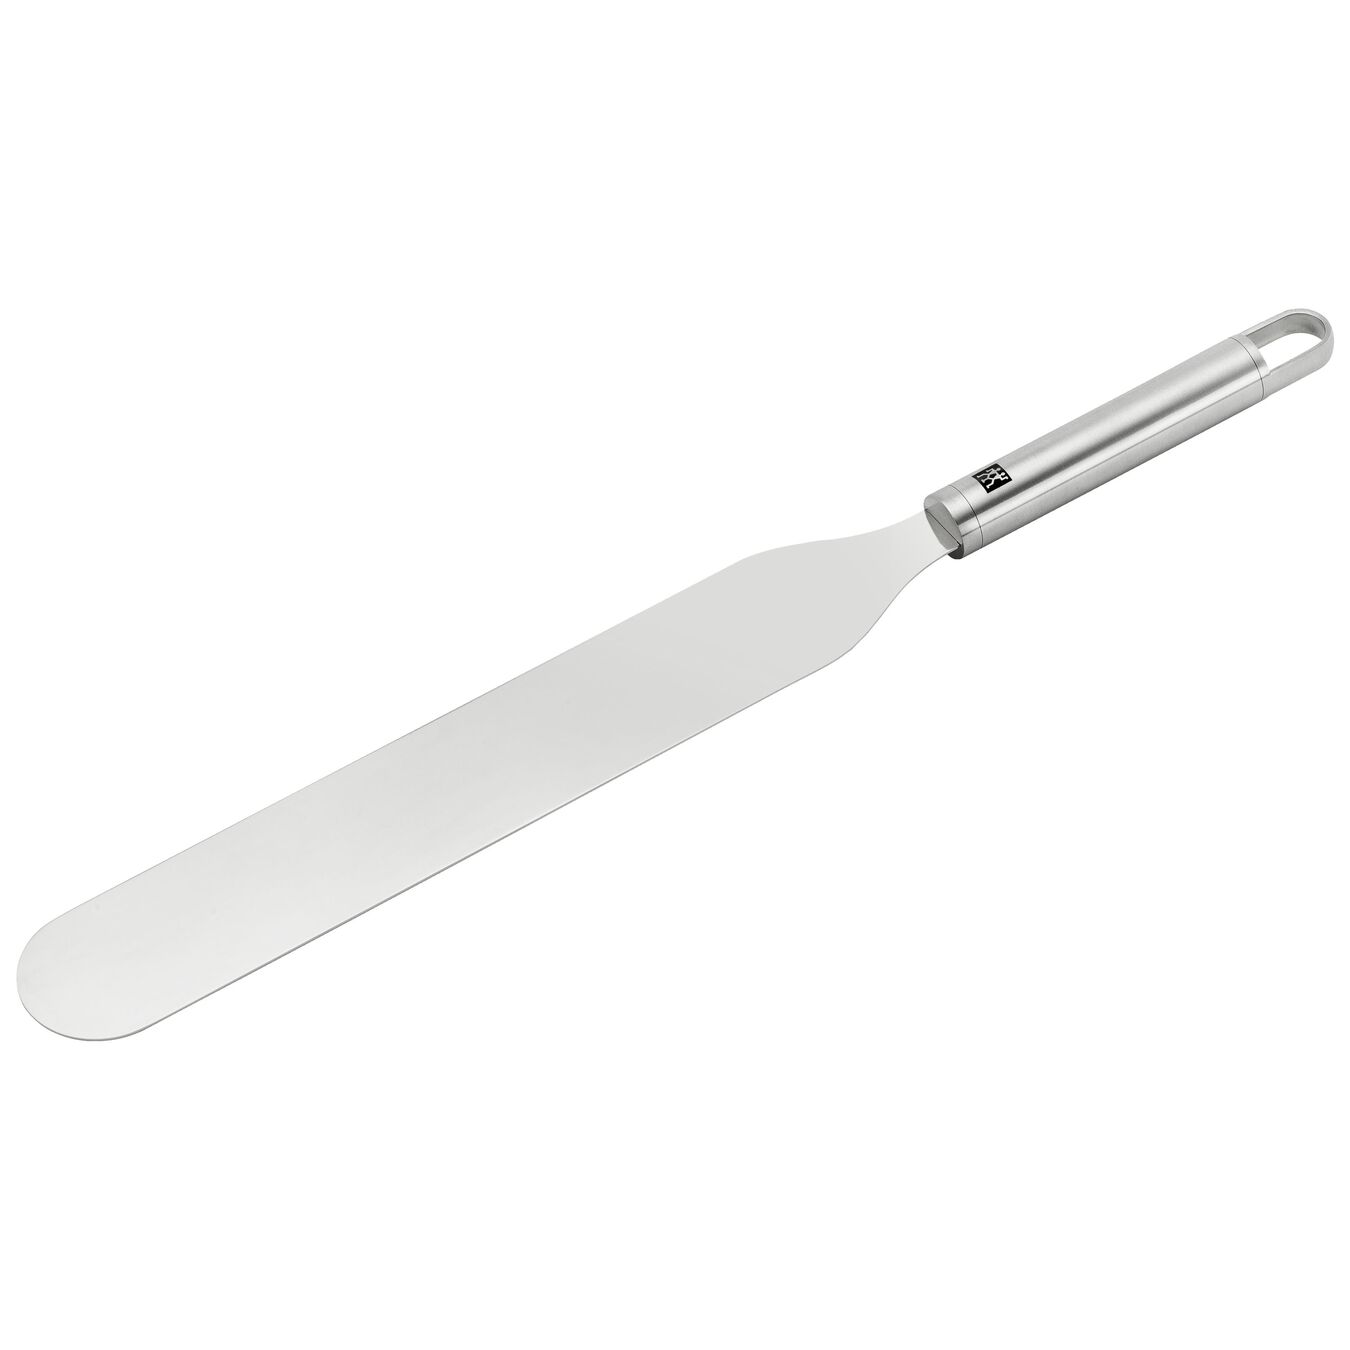 40 cm 18/10 Stainless Steel Spatula,,large 1